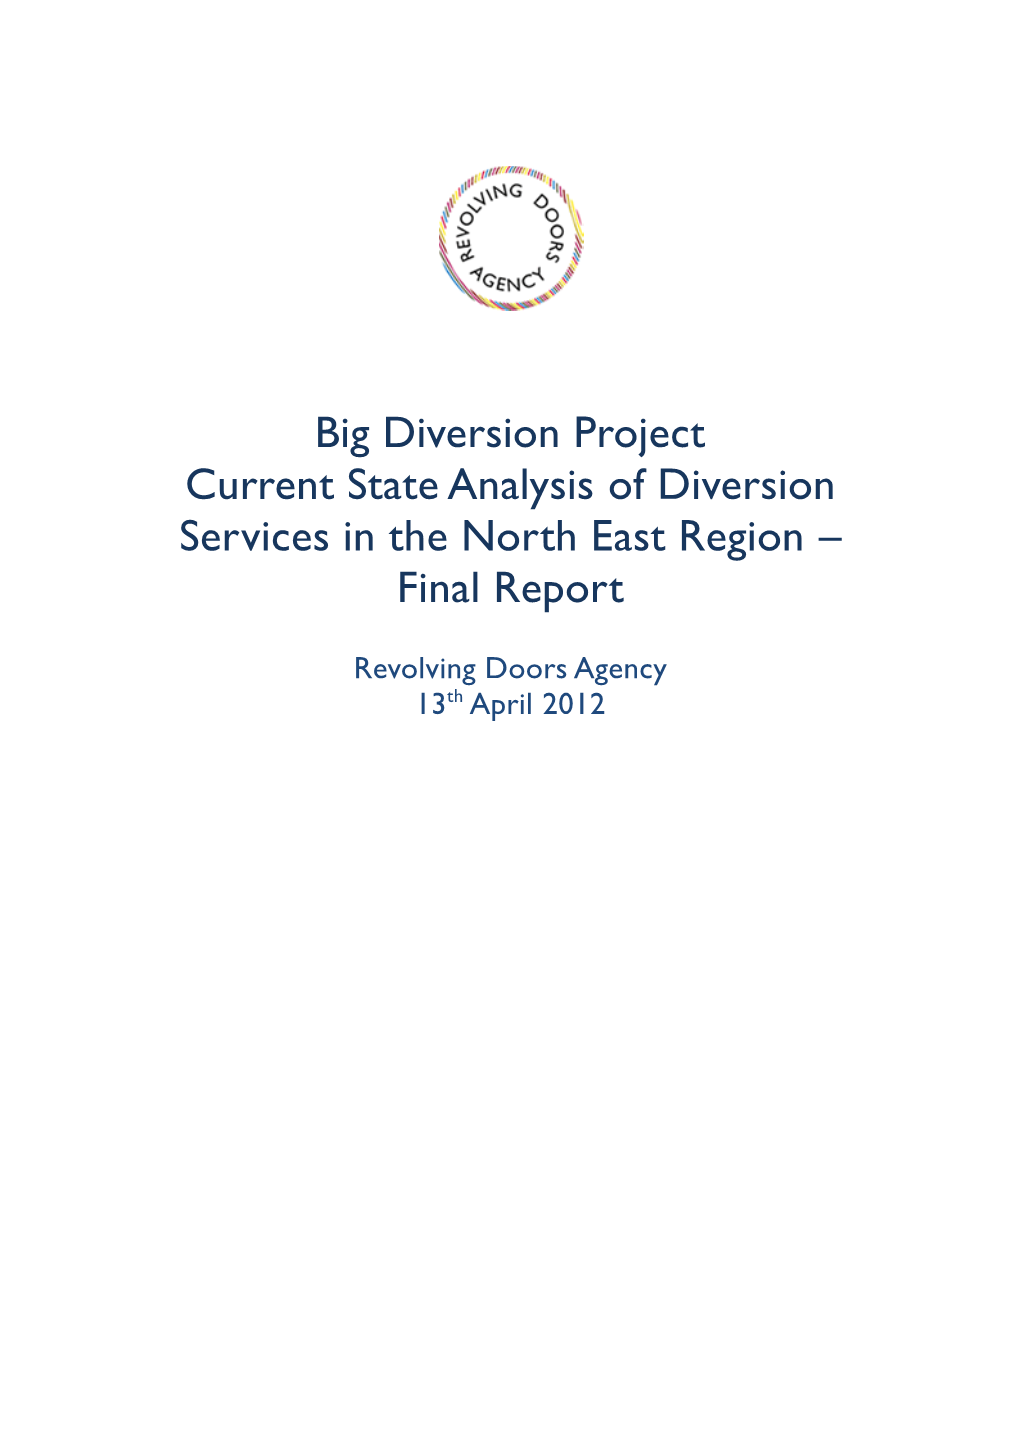 Big Diversion Project Current State Analysis of Diversion Services in the North East Region – Final Report